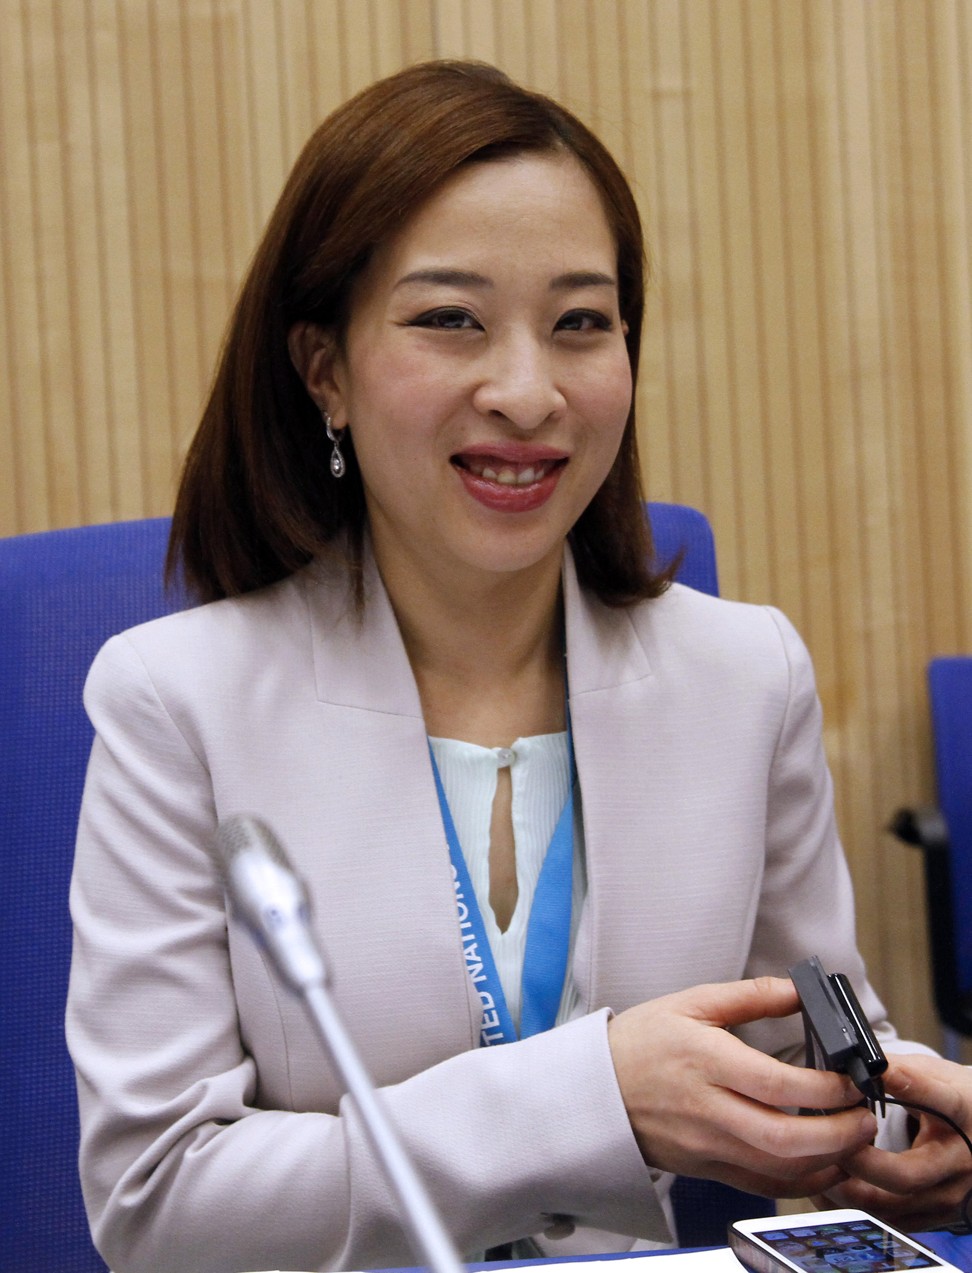 Princess Bajrakitiyabha at the 21st session of the Commission on Crime Prevention and Criminal Justice in Vienna on April 23, 2012. Photo: AP